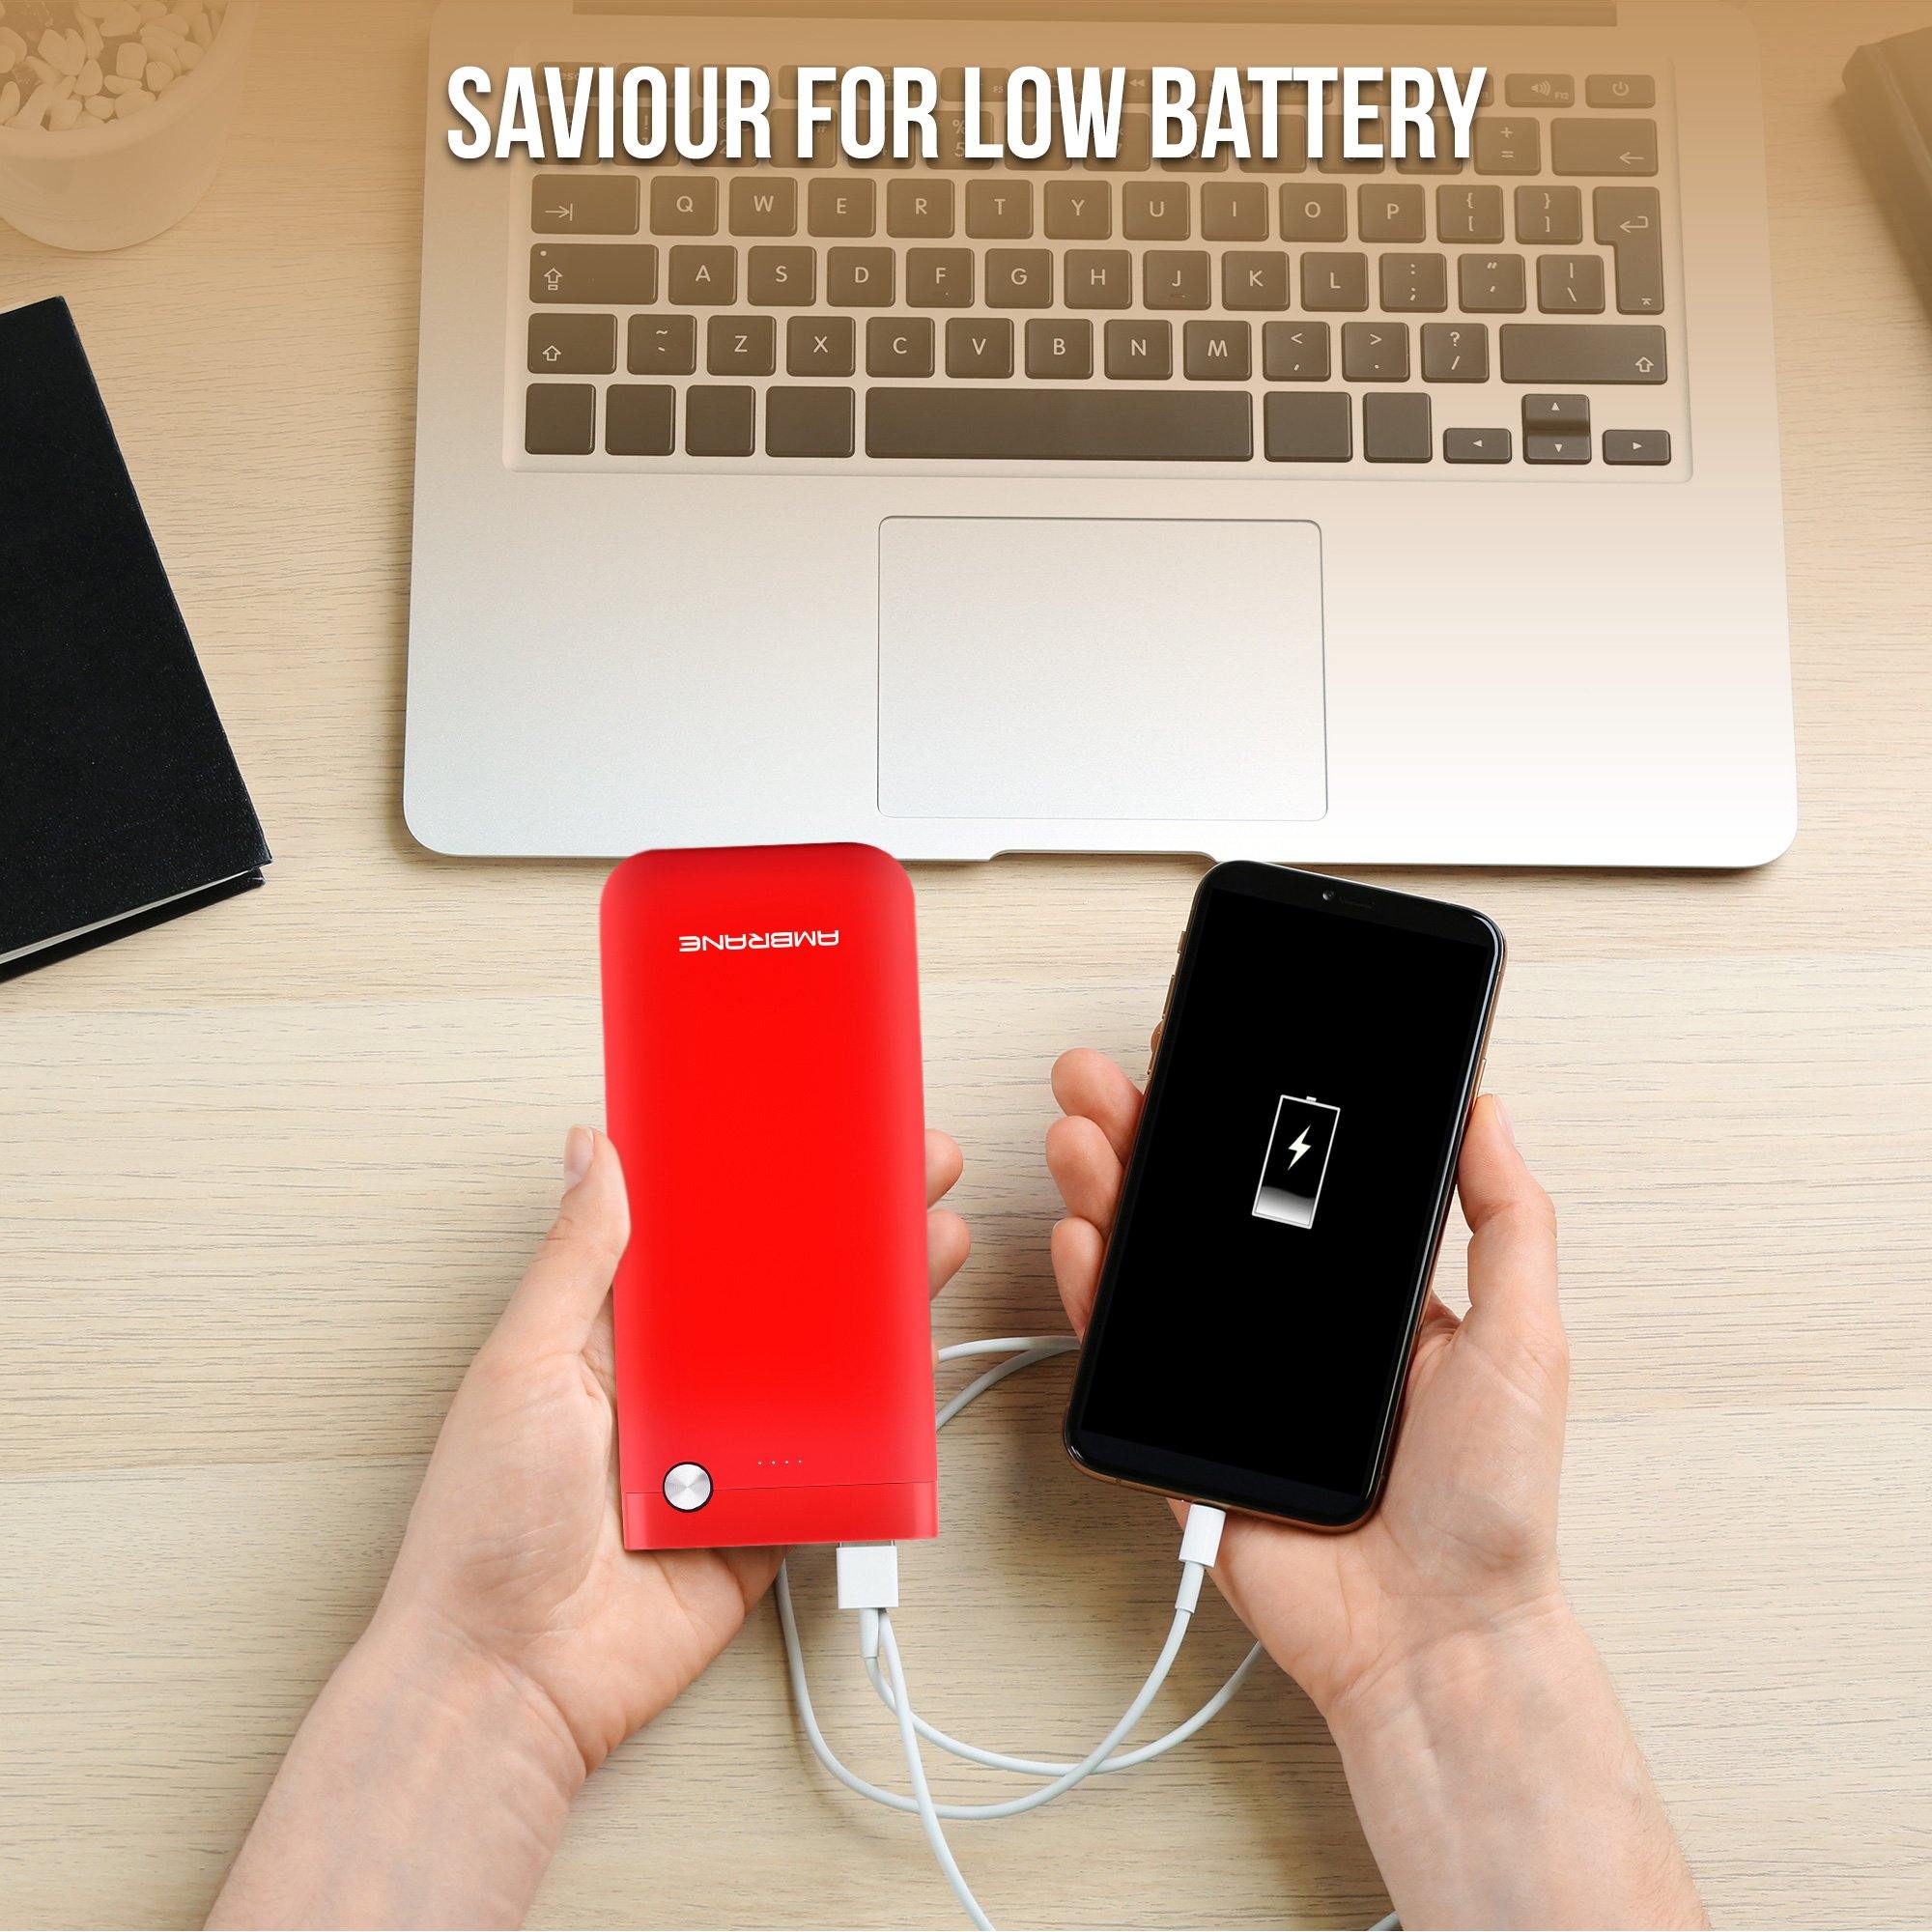 PP-20 20000 mAh Li-Polymer Powerbank with Dual Micro/ Type-C Input Fast Charging for Smartphone, Smart Watches, Neckbands & Other Devices, Made In India(Red) - AmbraneIndia